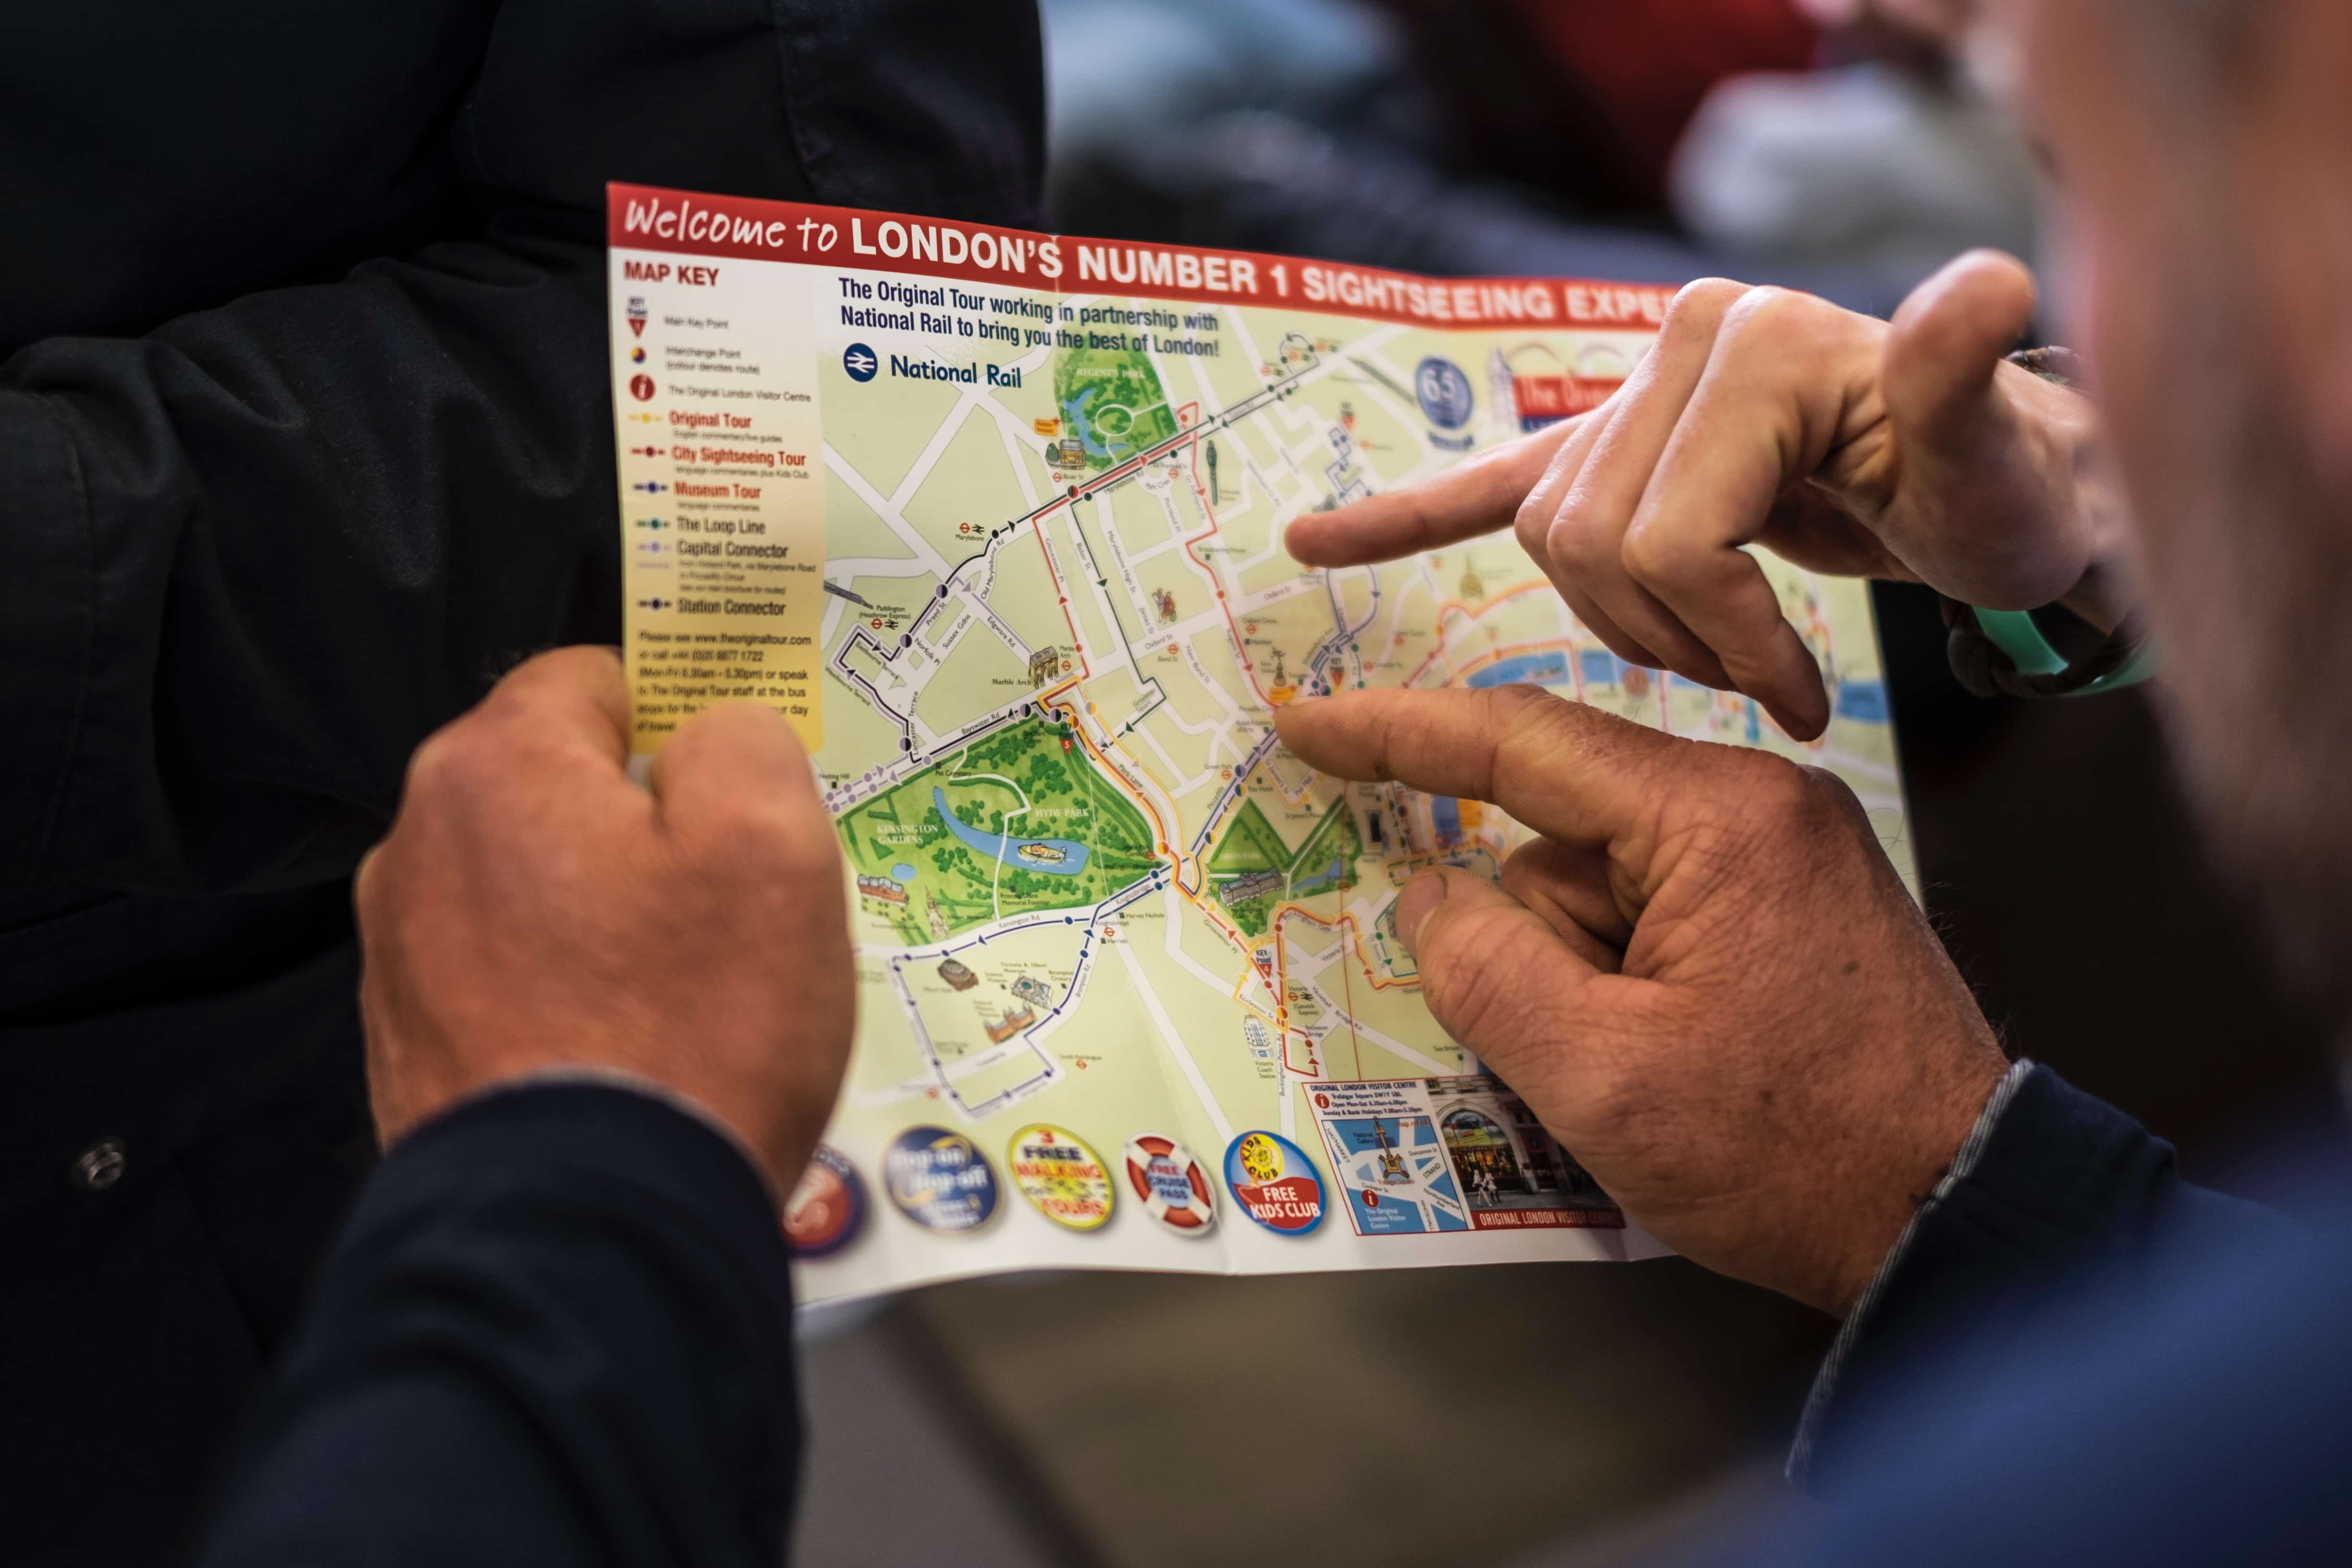 A person gives directions using a map